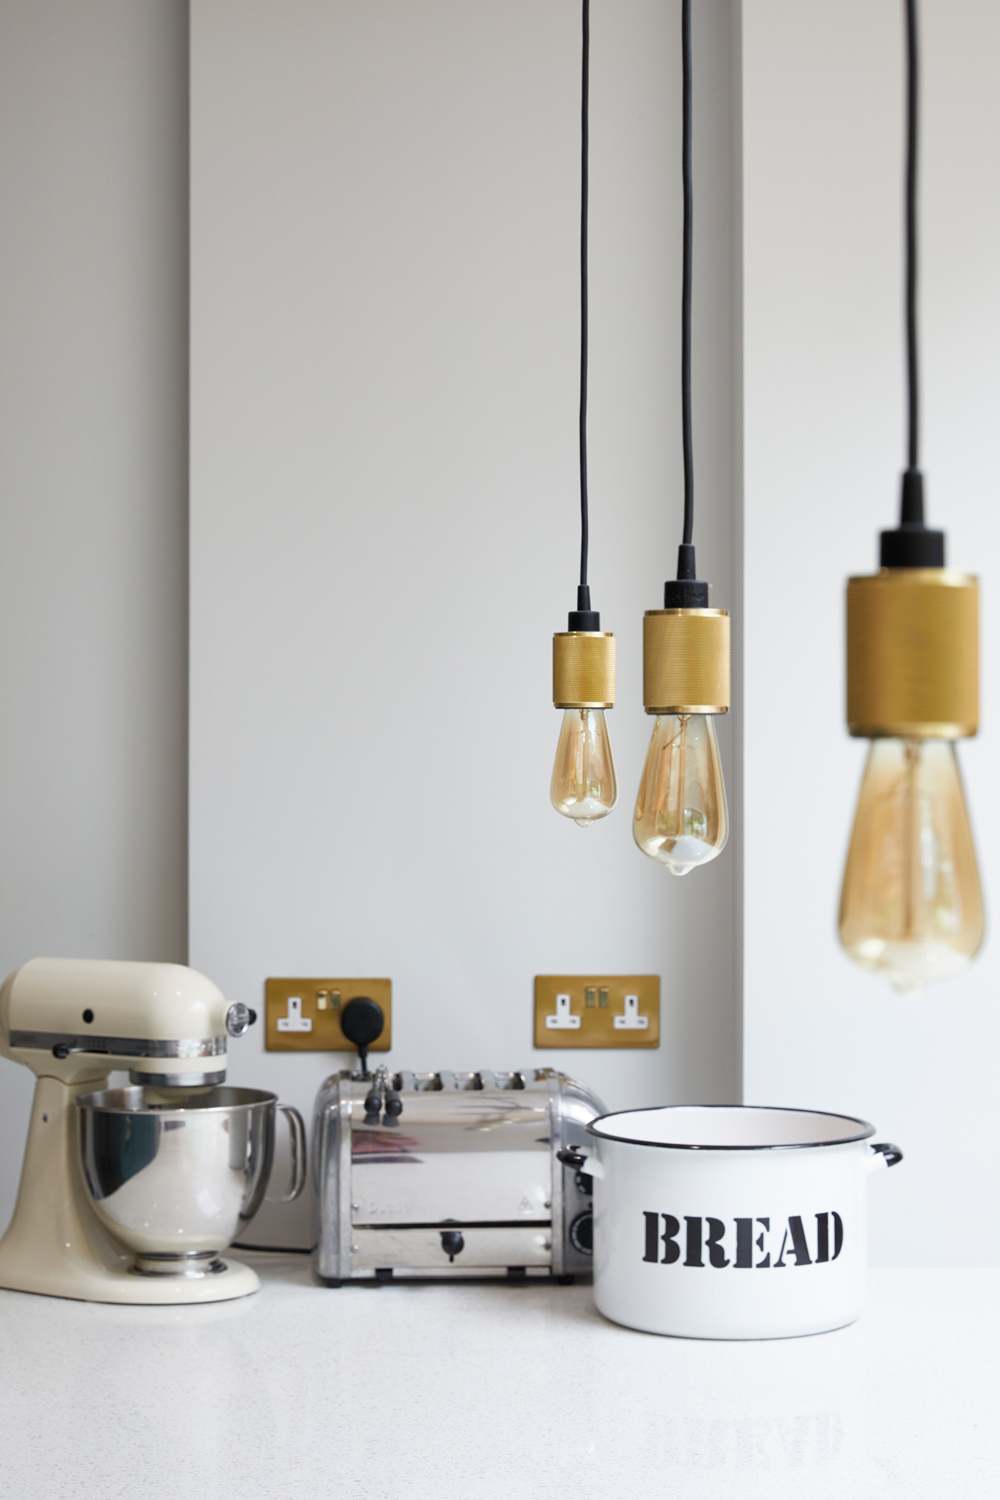 Toaster, Mixer and Bread post sit on white quartz worktop with heavy metal brass pendants by Buster and Punch hang above